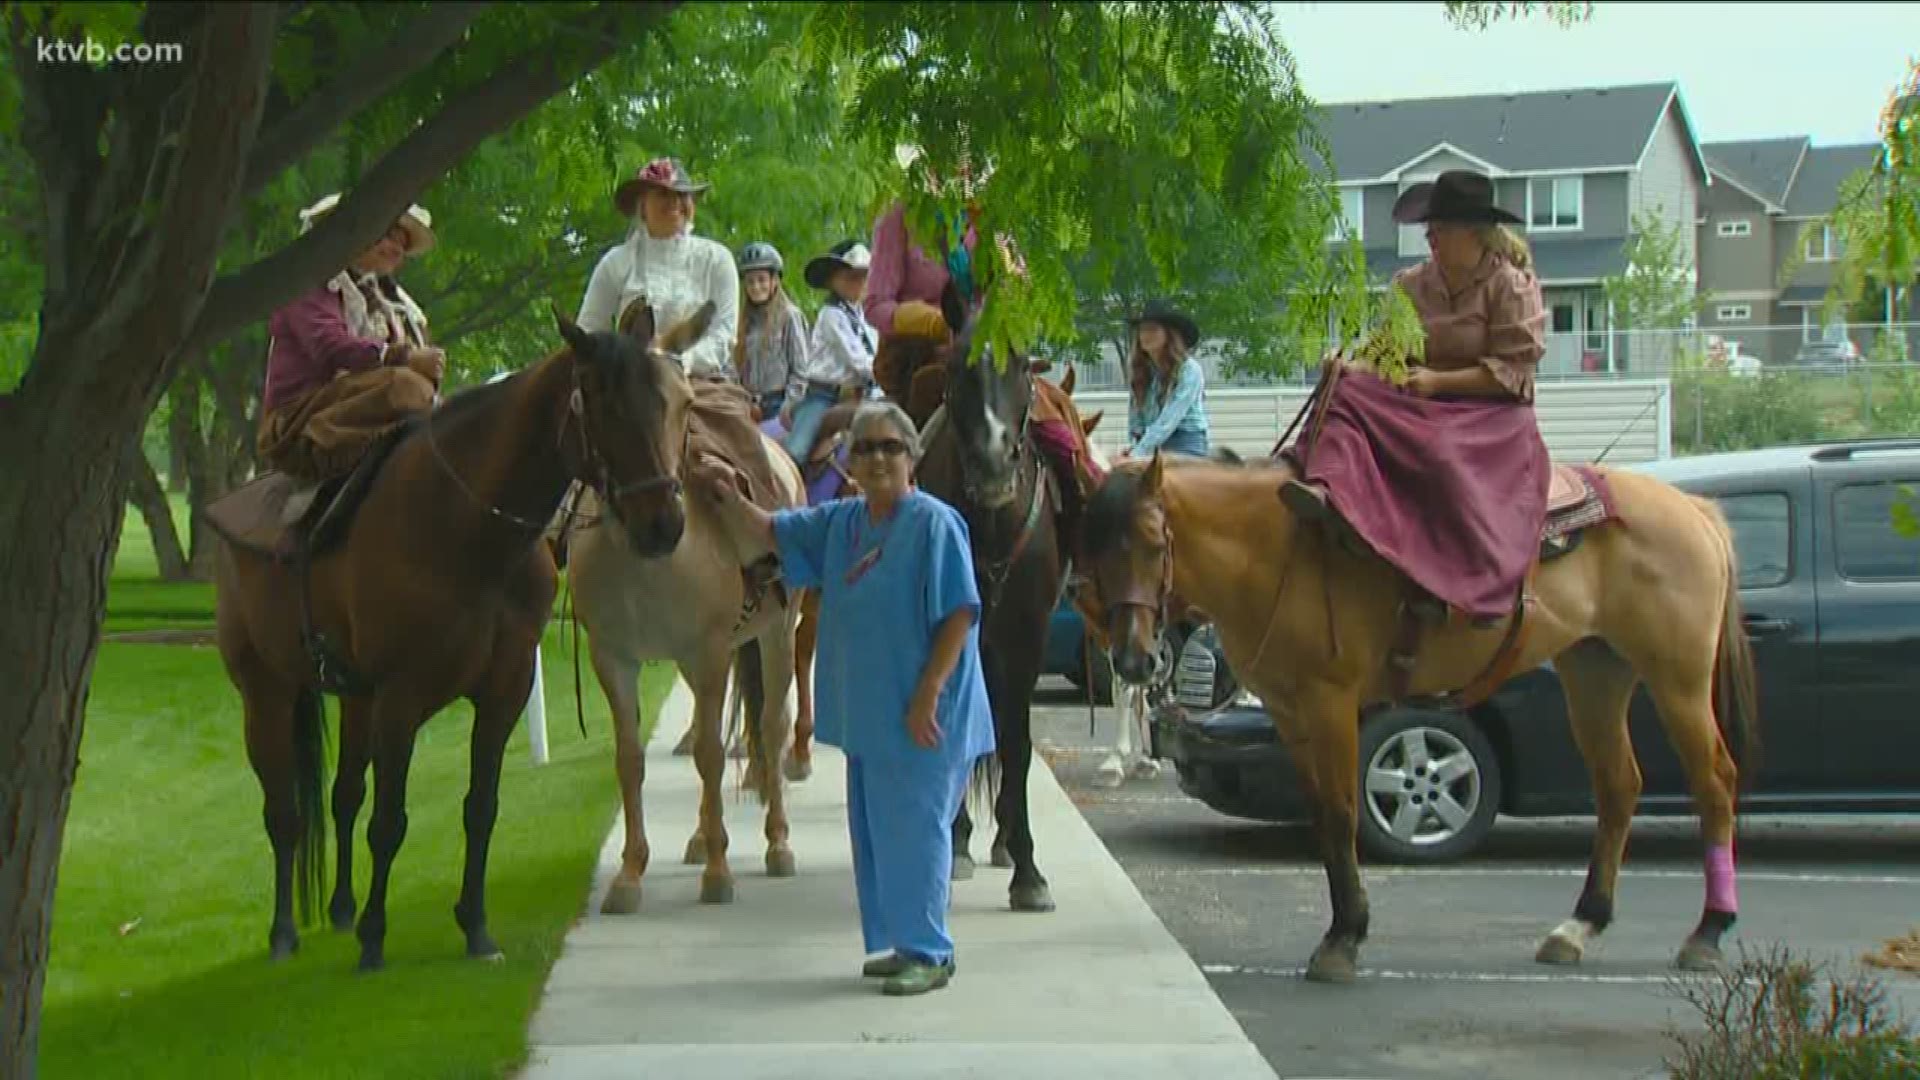 Nyssa rodeo queen Jaeden Forrey brought in 25 other rodeo queens to ride around senior care facilities.